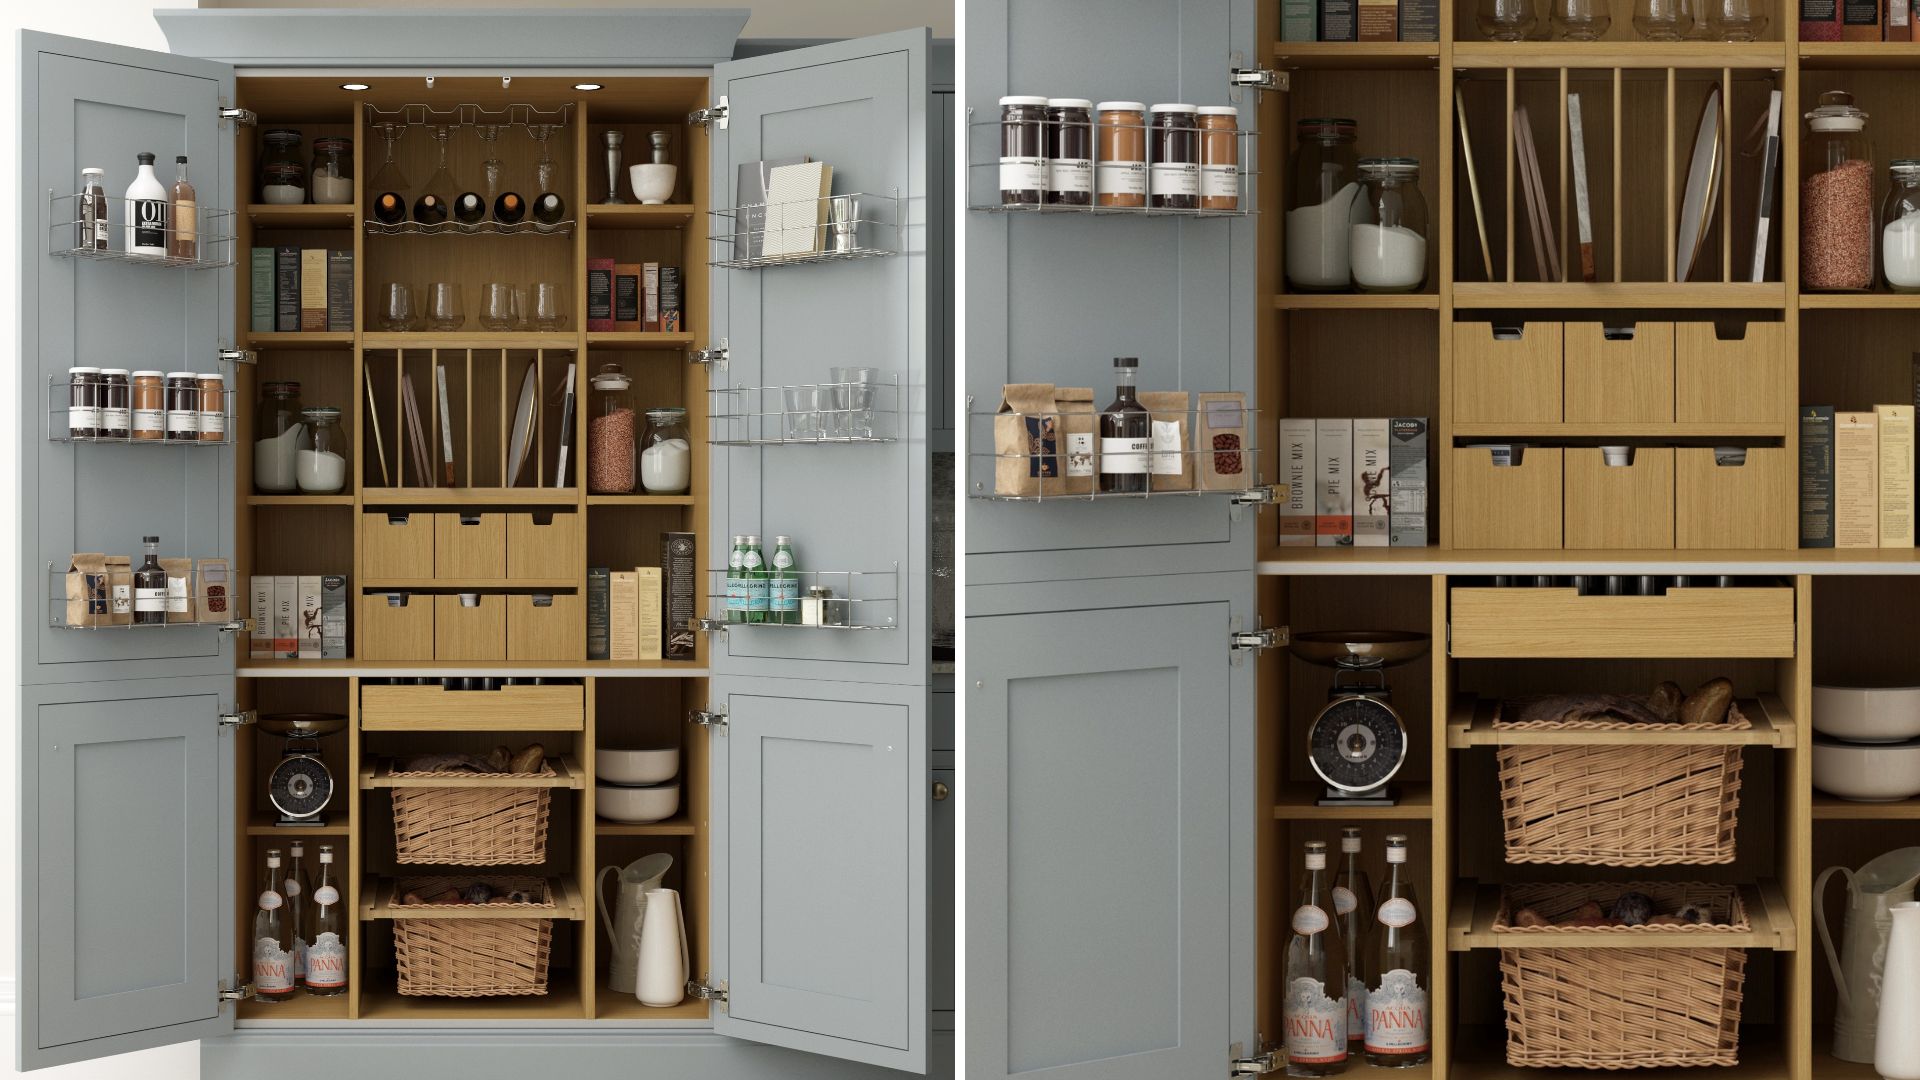 Inside a well-organized kitchen pantry with multiple zones for all storage